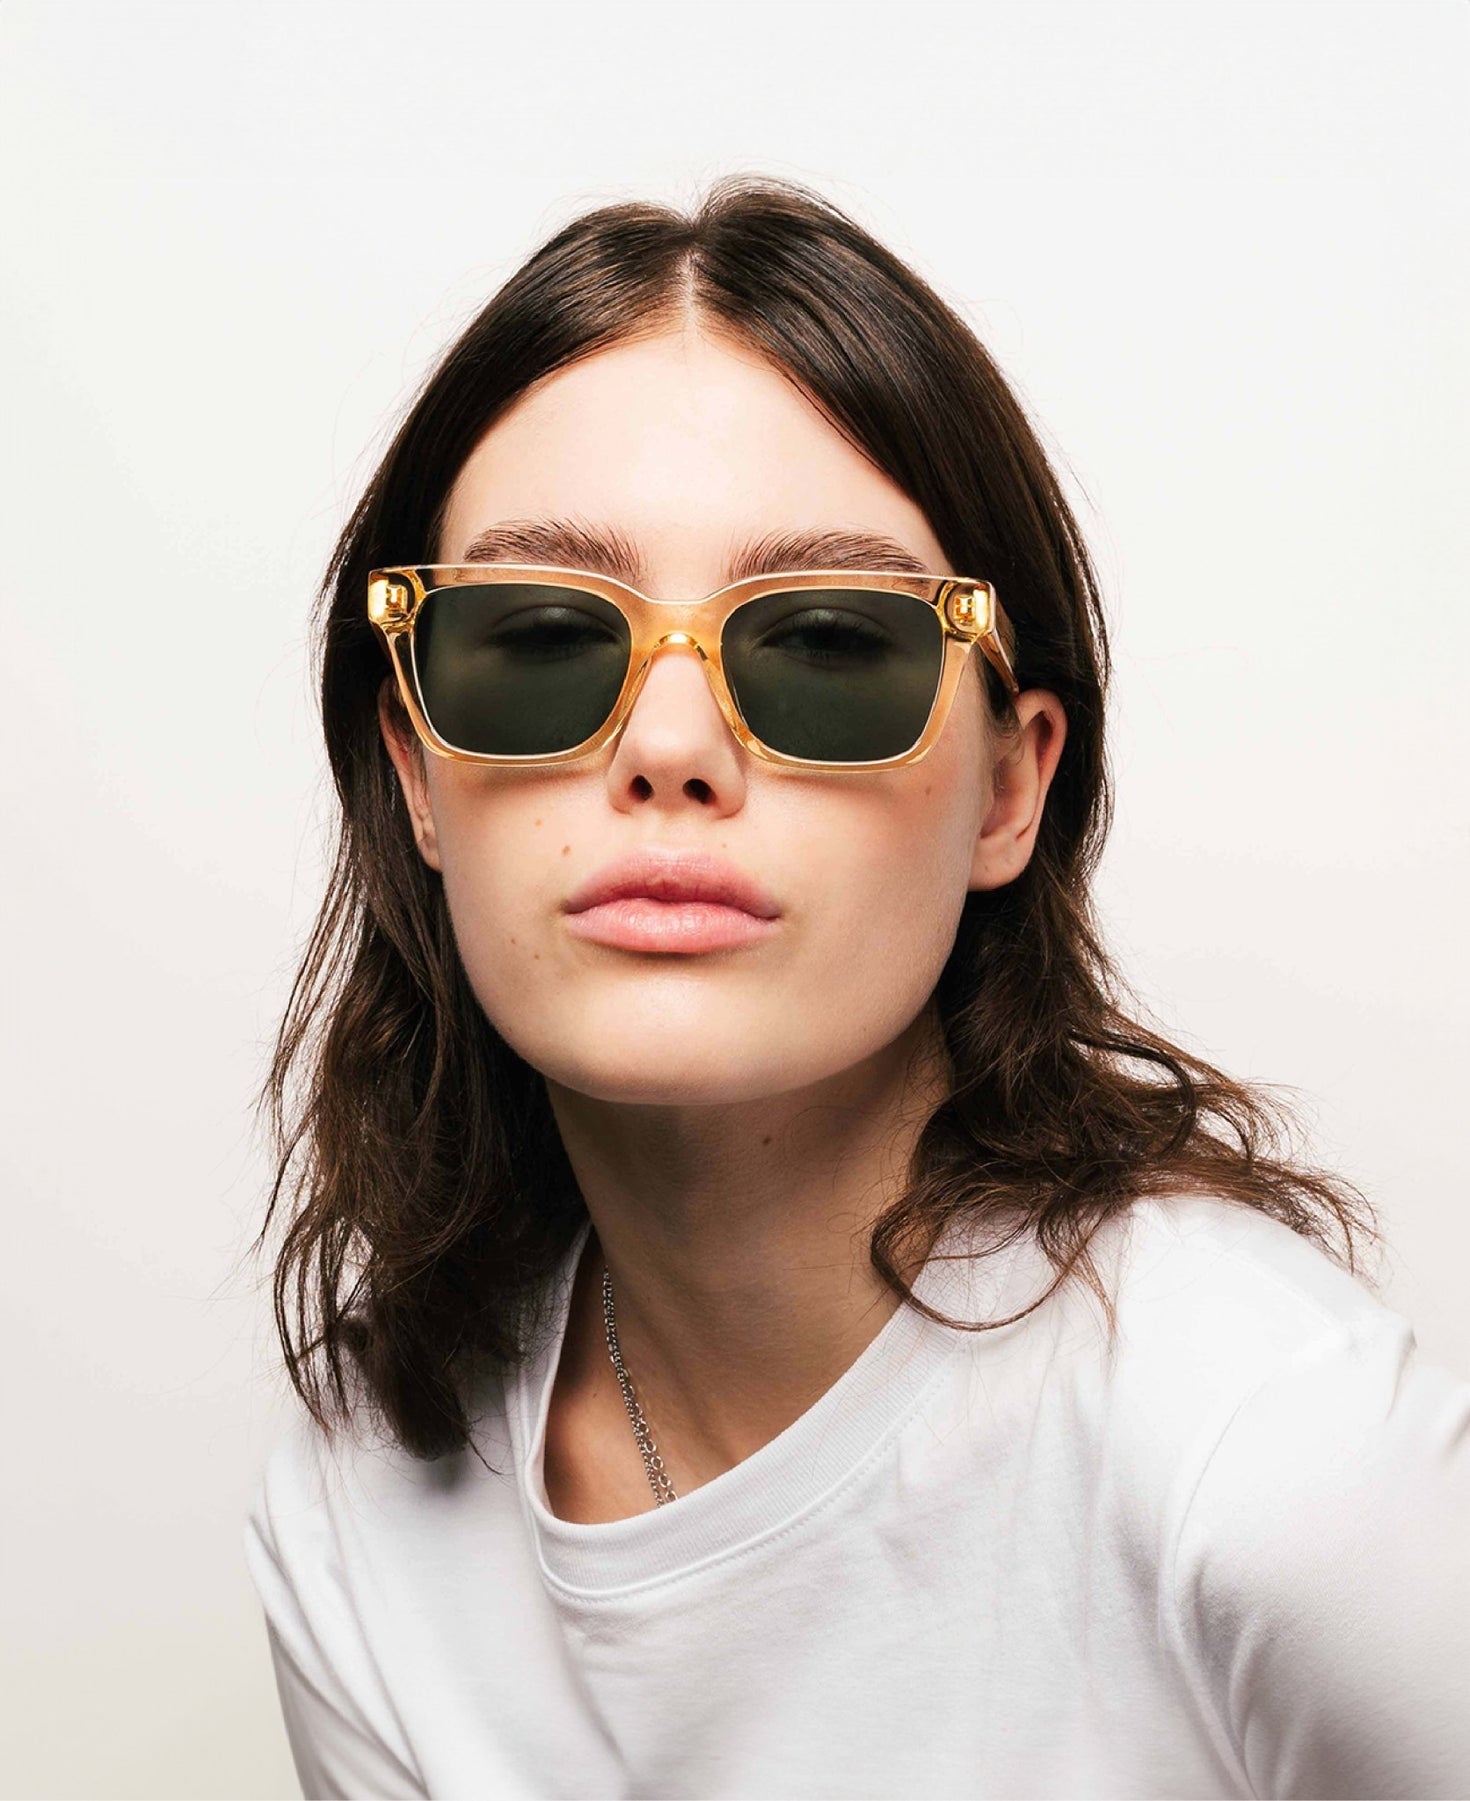 Messy Weekend Dean Sunglasses - Champagne Green